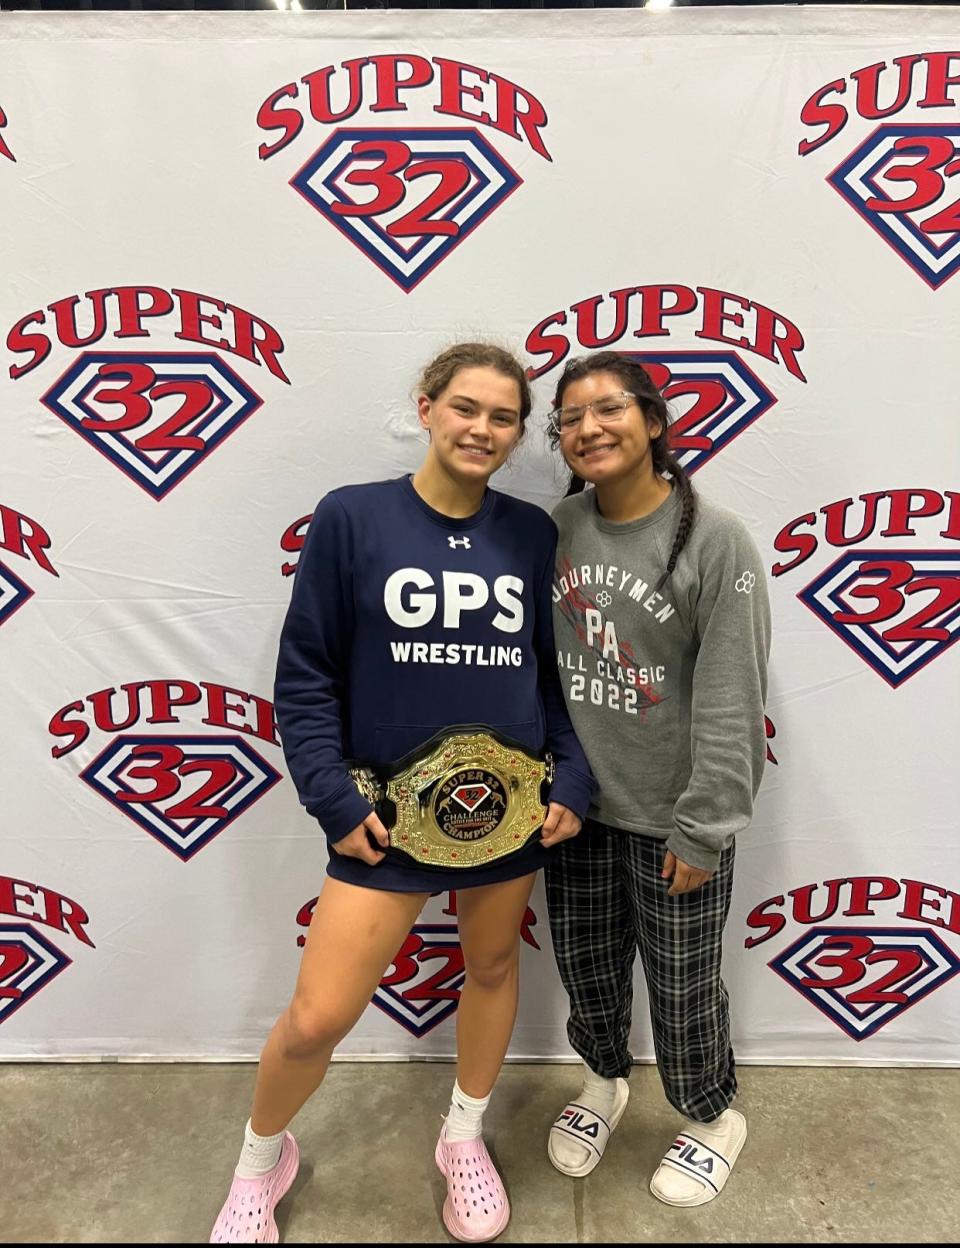 Pleasantville junior Adriana Palumbo poses for a photo with GPS Wrestling teammate Lauren Garcia of White Plains following her 155-pound title win at the 2023 Super 32